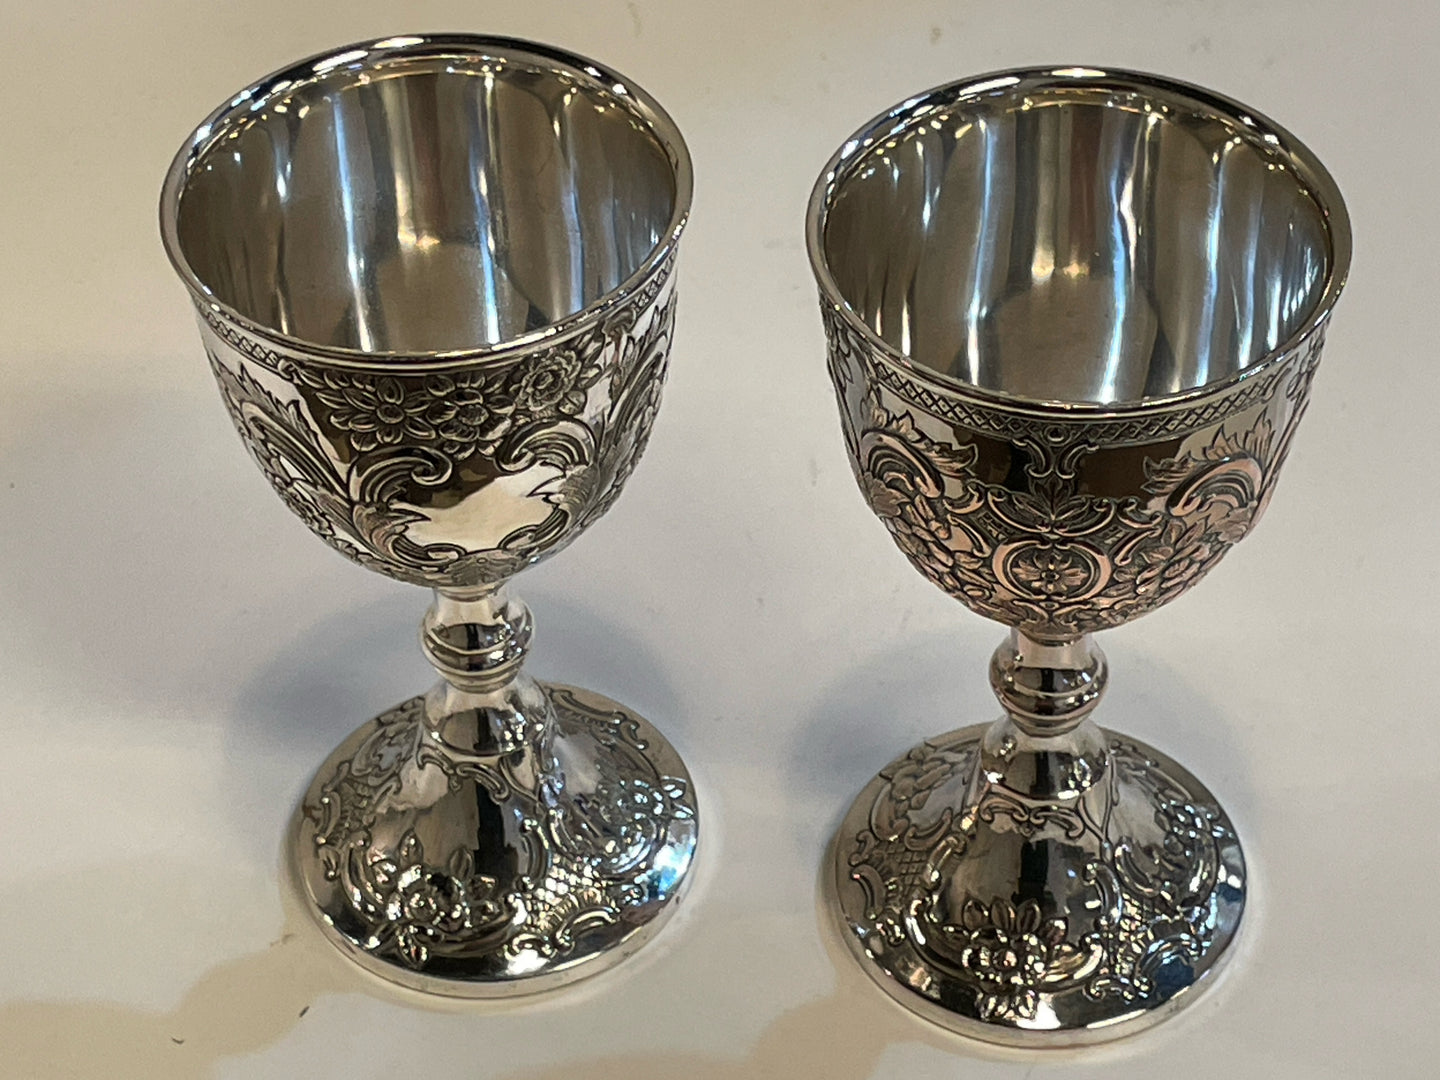 Pair of Small Silver Goblets